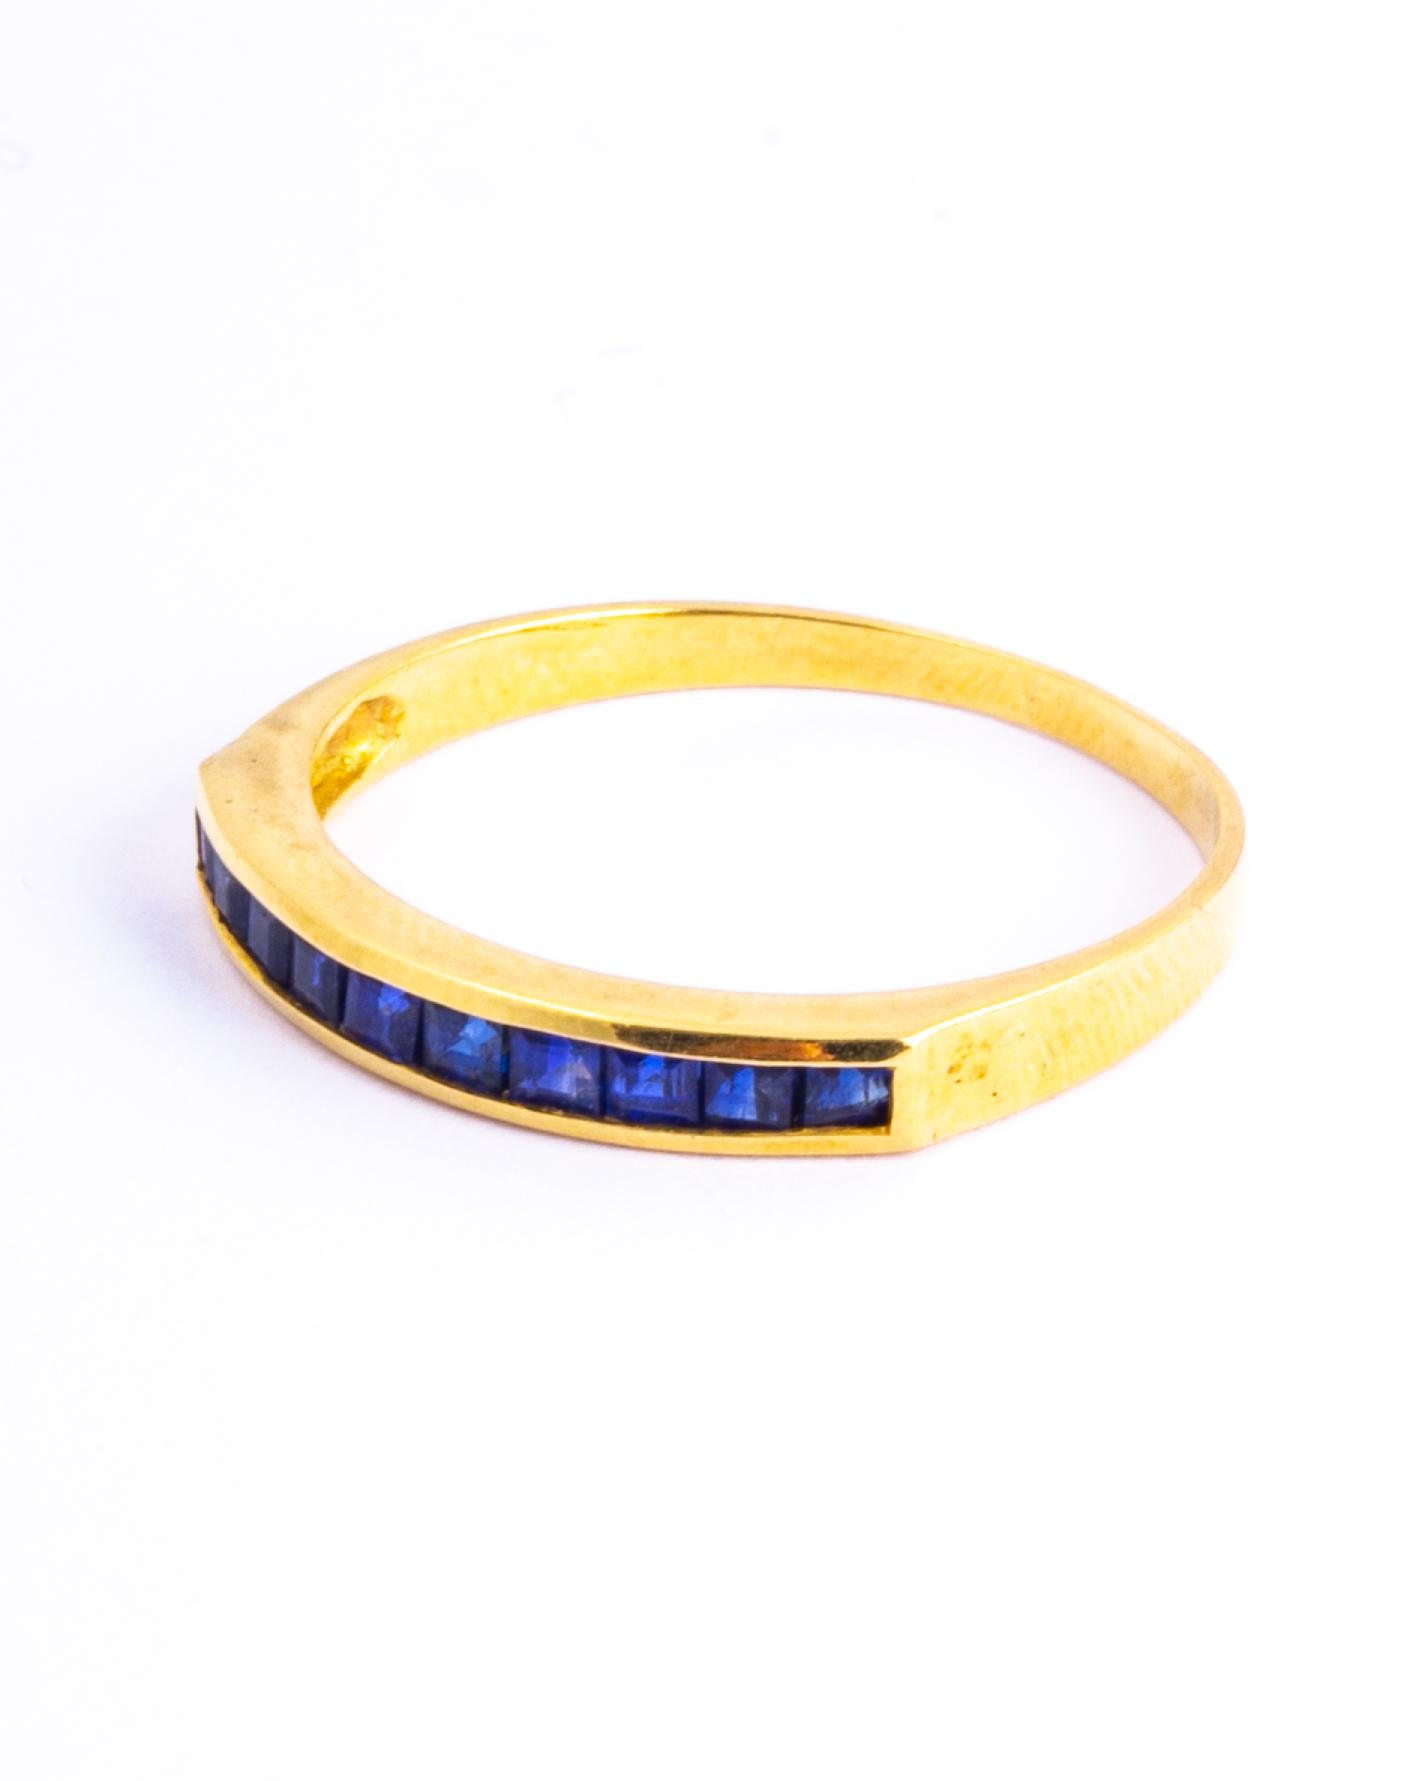 The sapphire set within this 9ct gold band are square cut and total approx 50pts. They have a great shine to them and are beautifully bright stones. 

Ring Size: N or 6 3/4 
Band Width: 2.5mm 

Weight: 1.62g